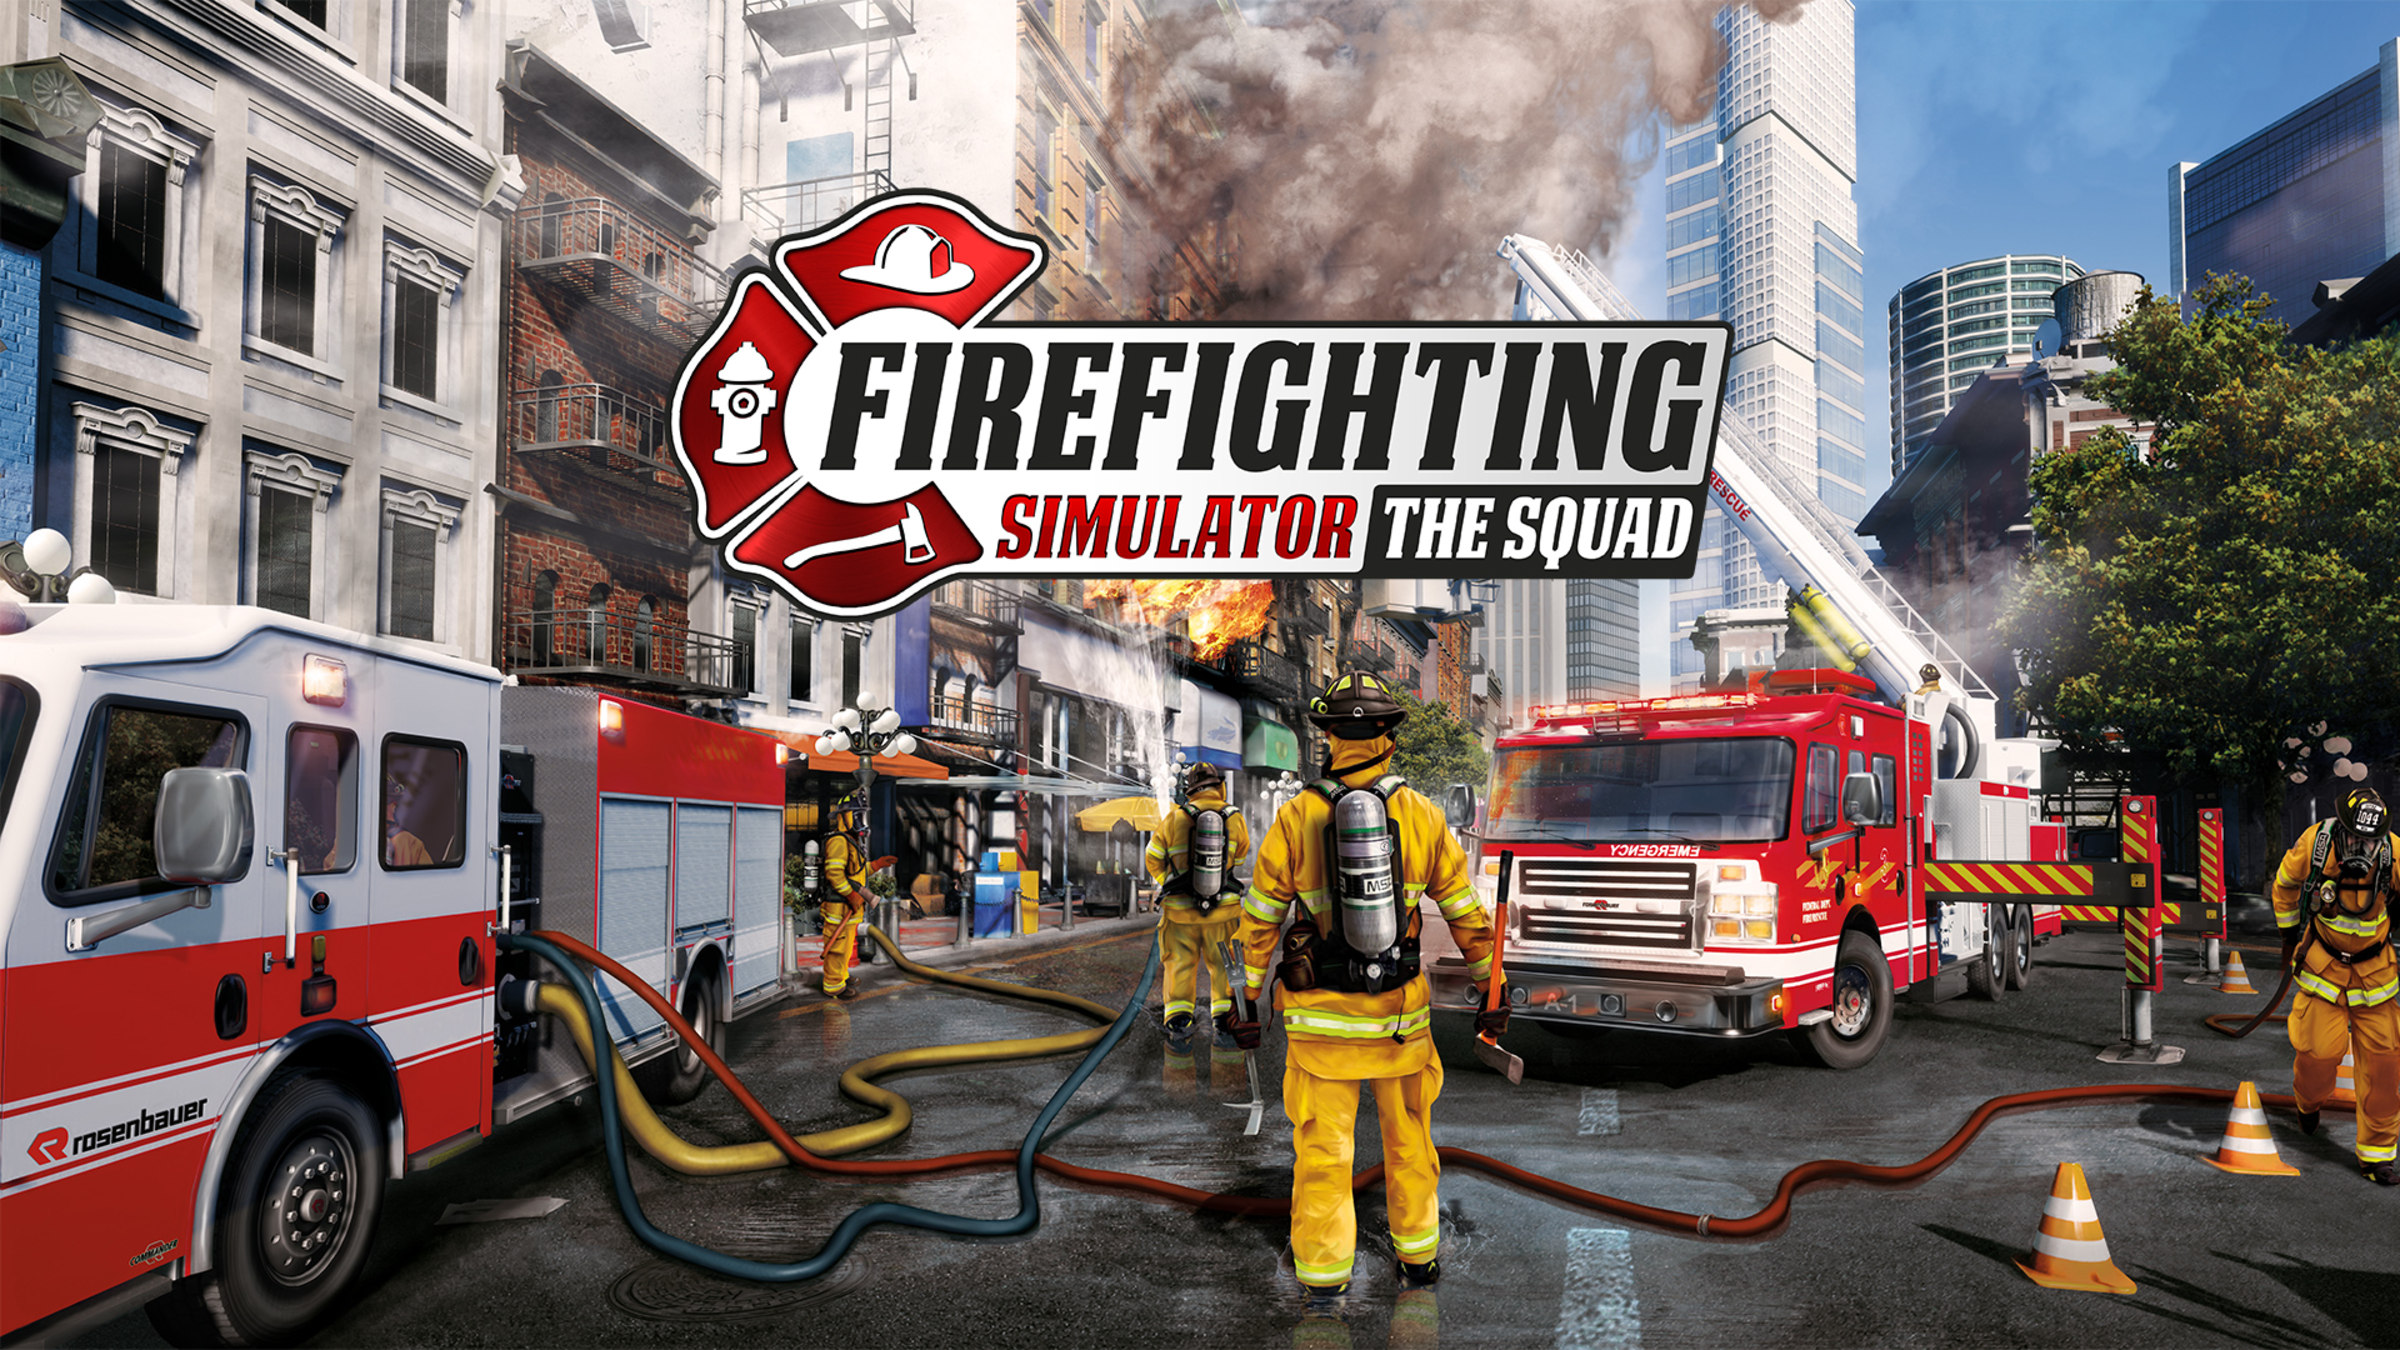 - Nintendo Nintendo Site Official Firefighting Switch Squad Simulator - for The